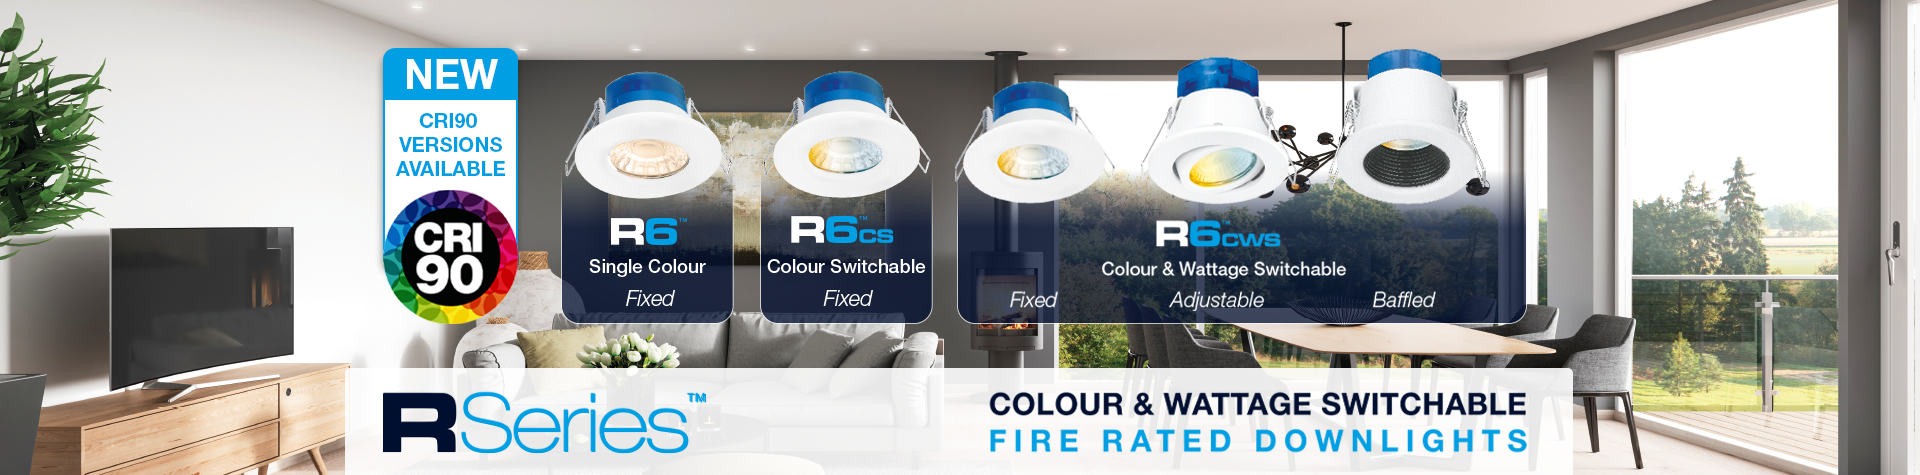 Show products in category NEW Revolutionary CRI90 Colour and Wattage Switchable Fire Rated Downlight